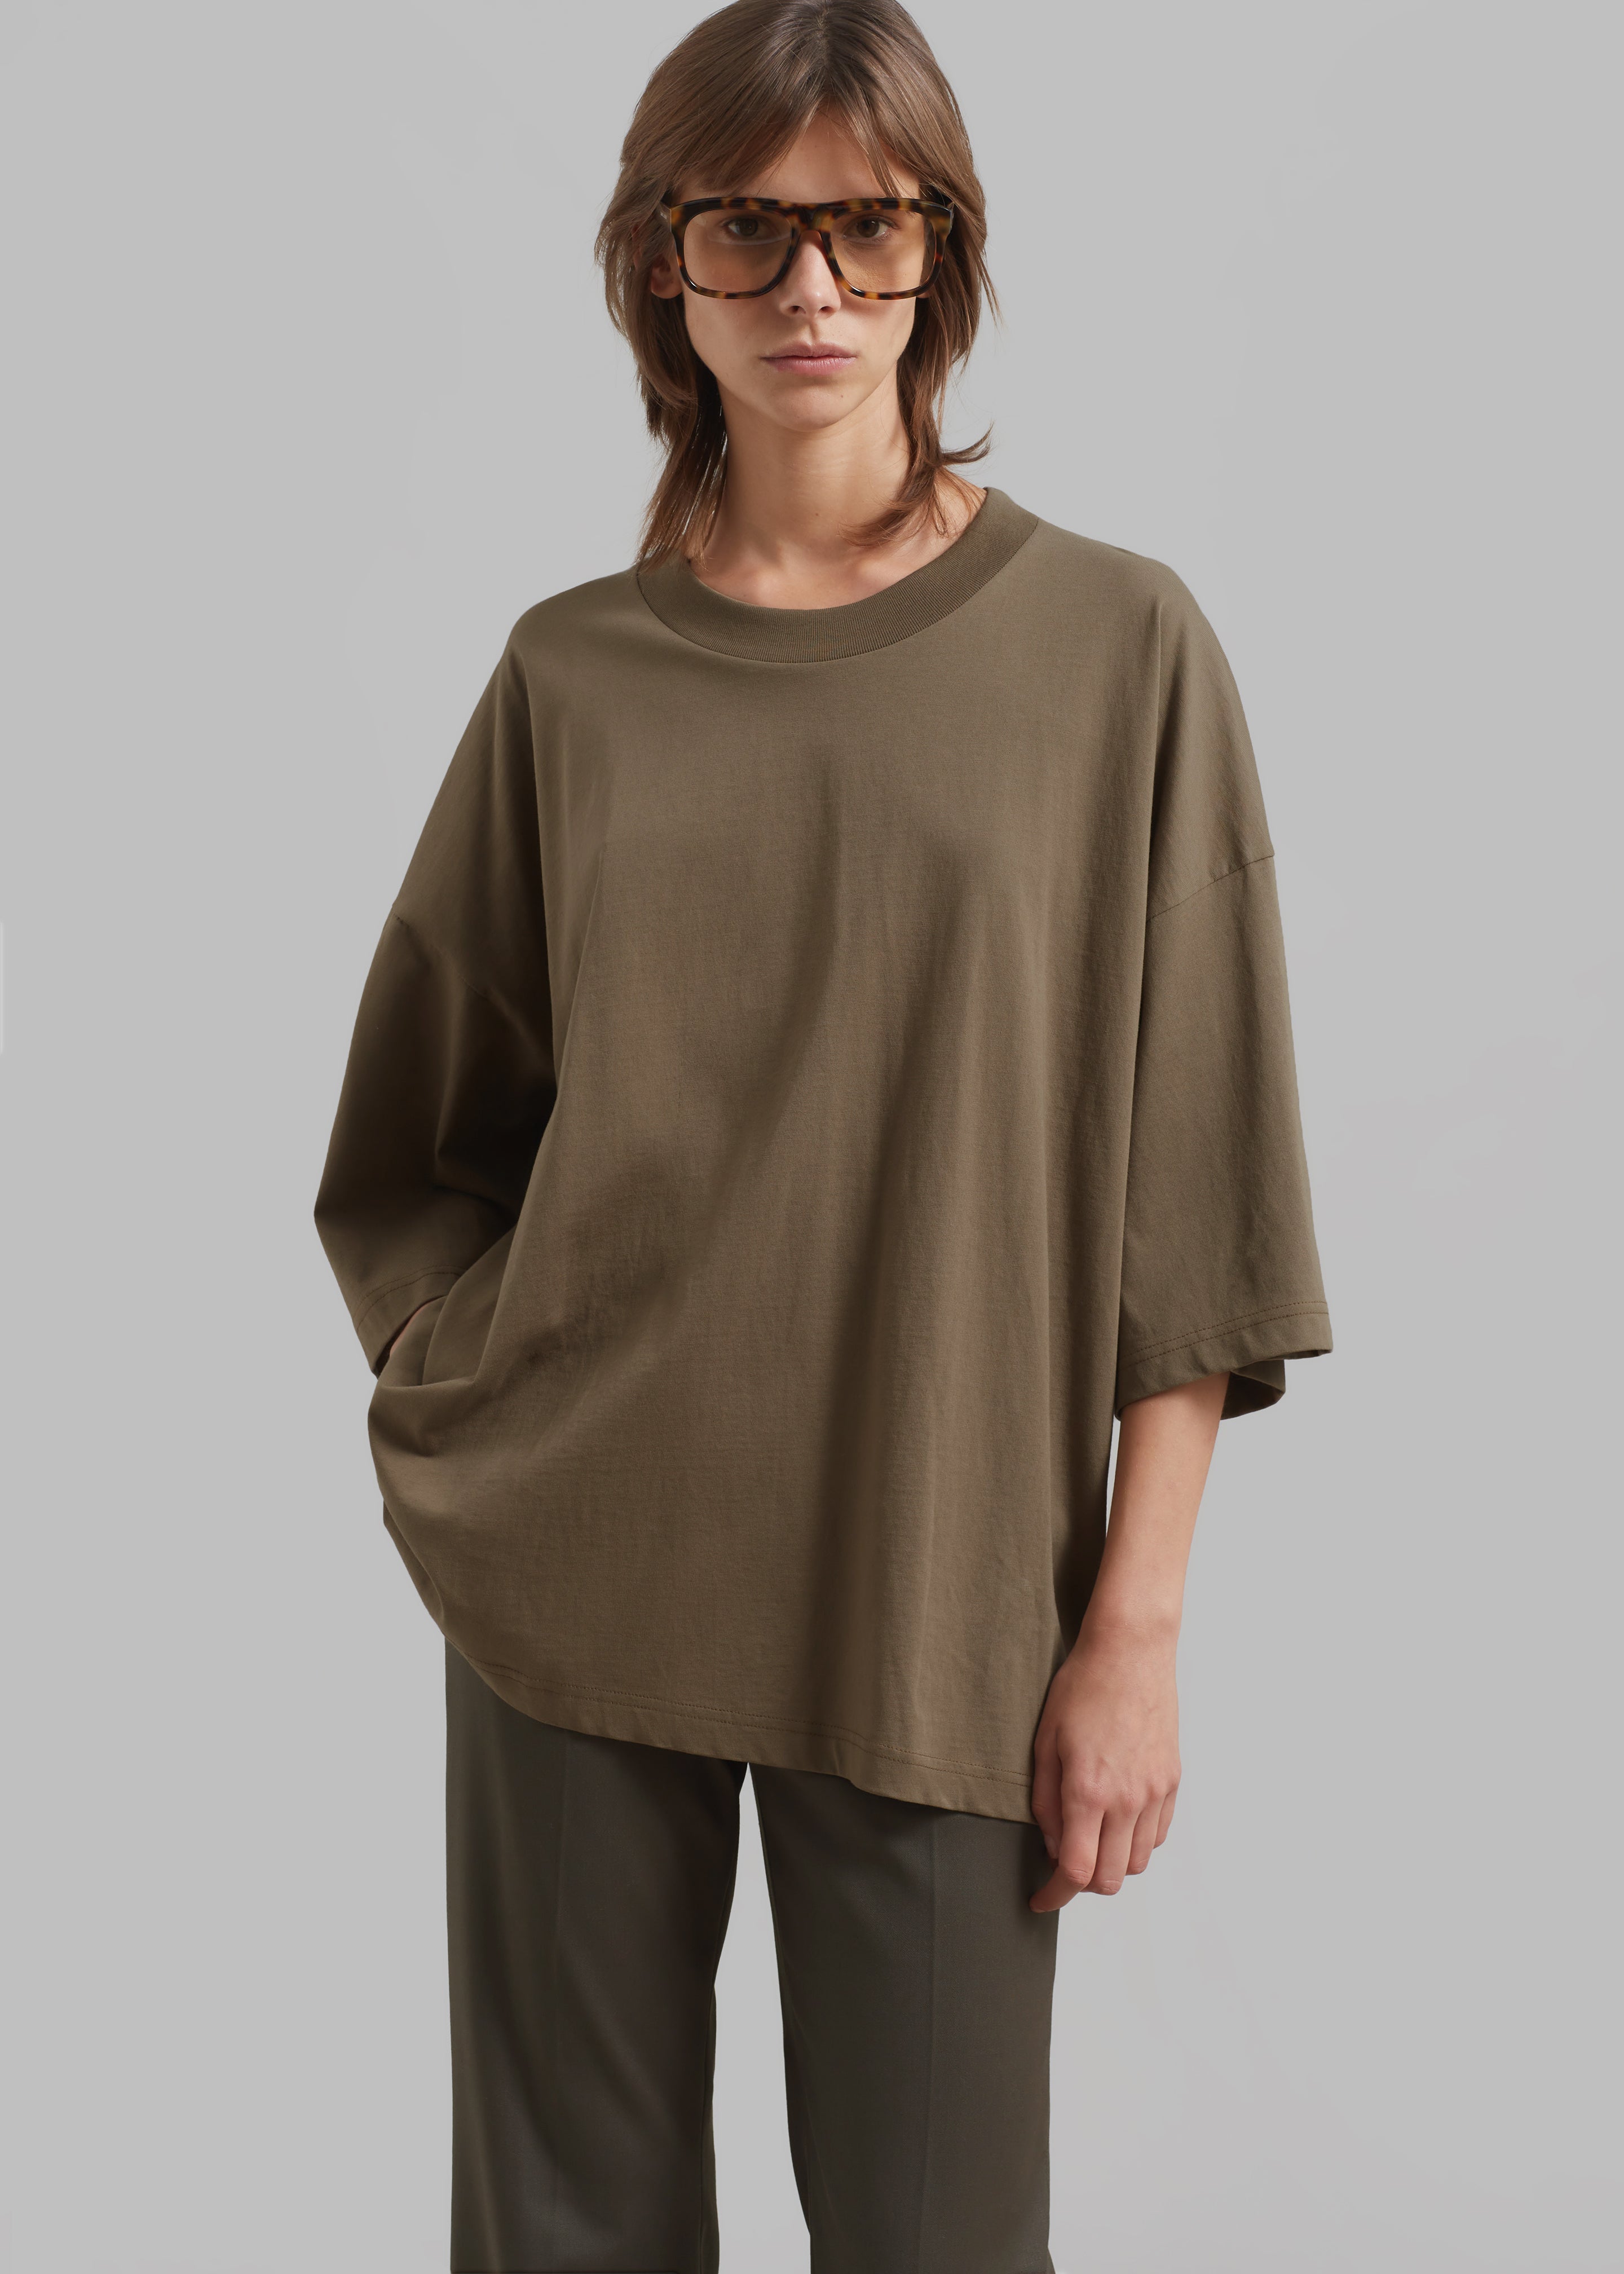 Harlow Oversized Tee - Olive – The Frankie Shop